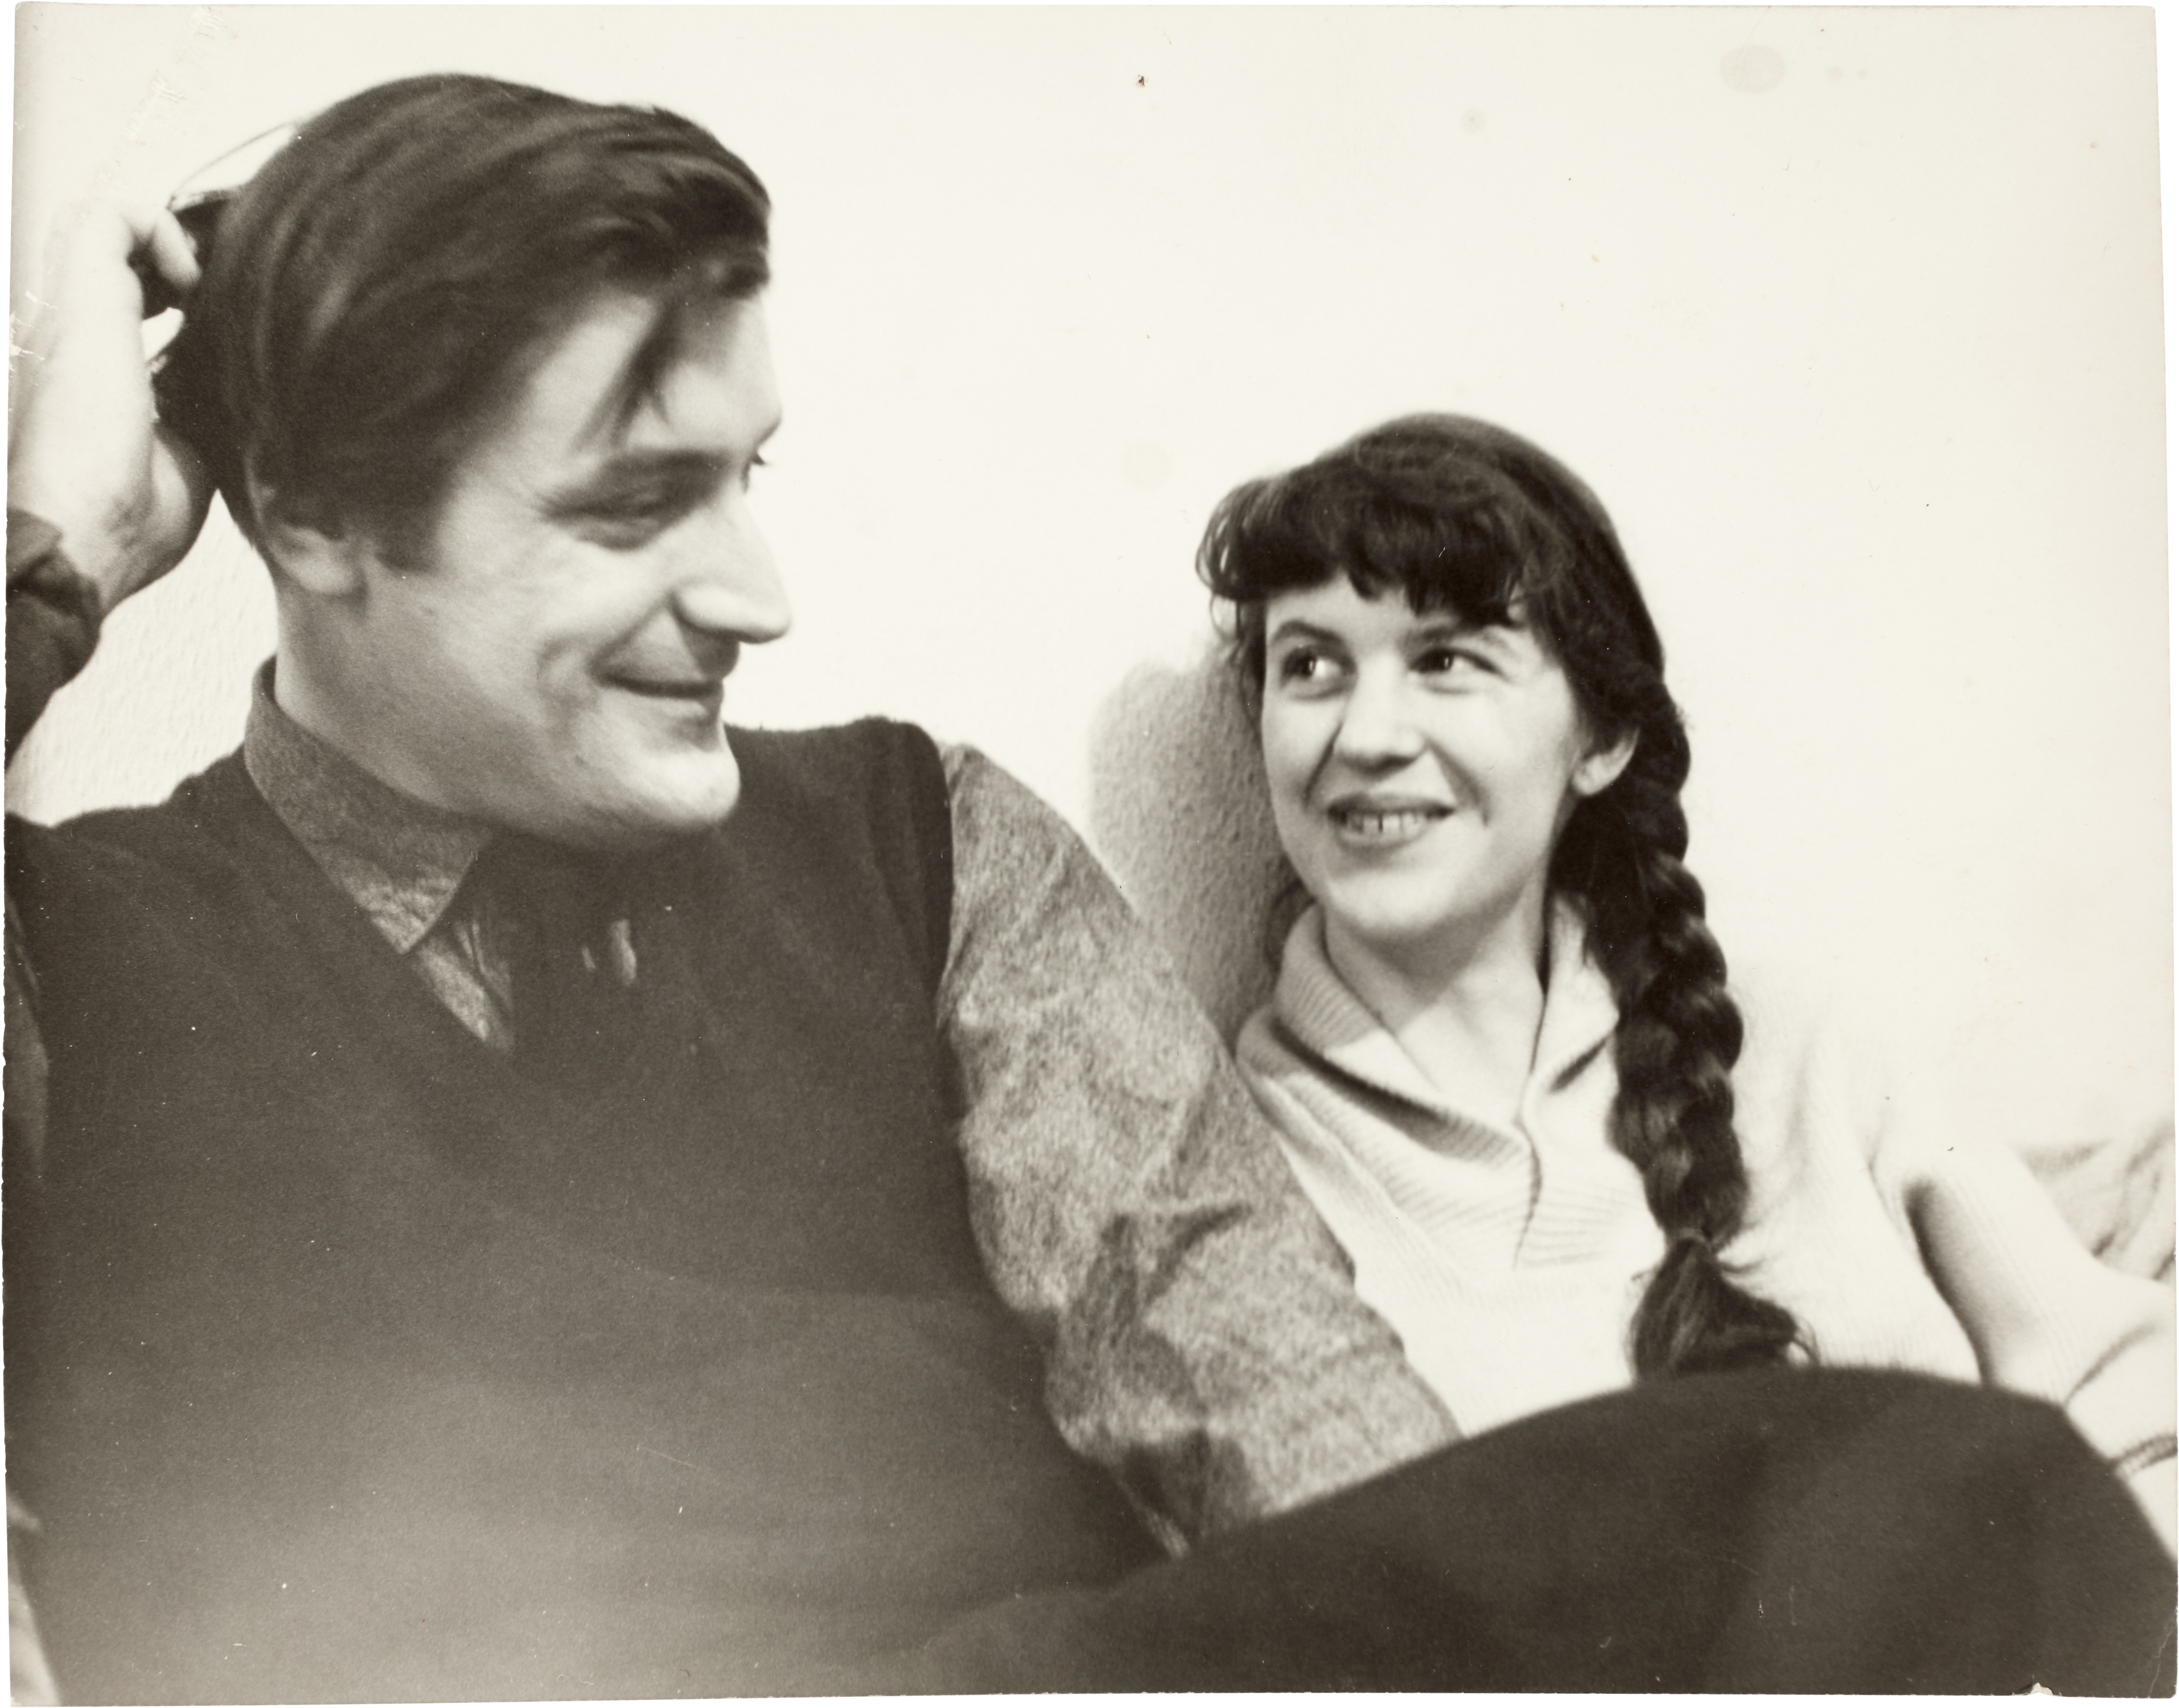 Photograph of Ted Hughes and Sylvia Plath